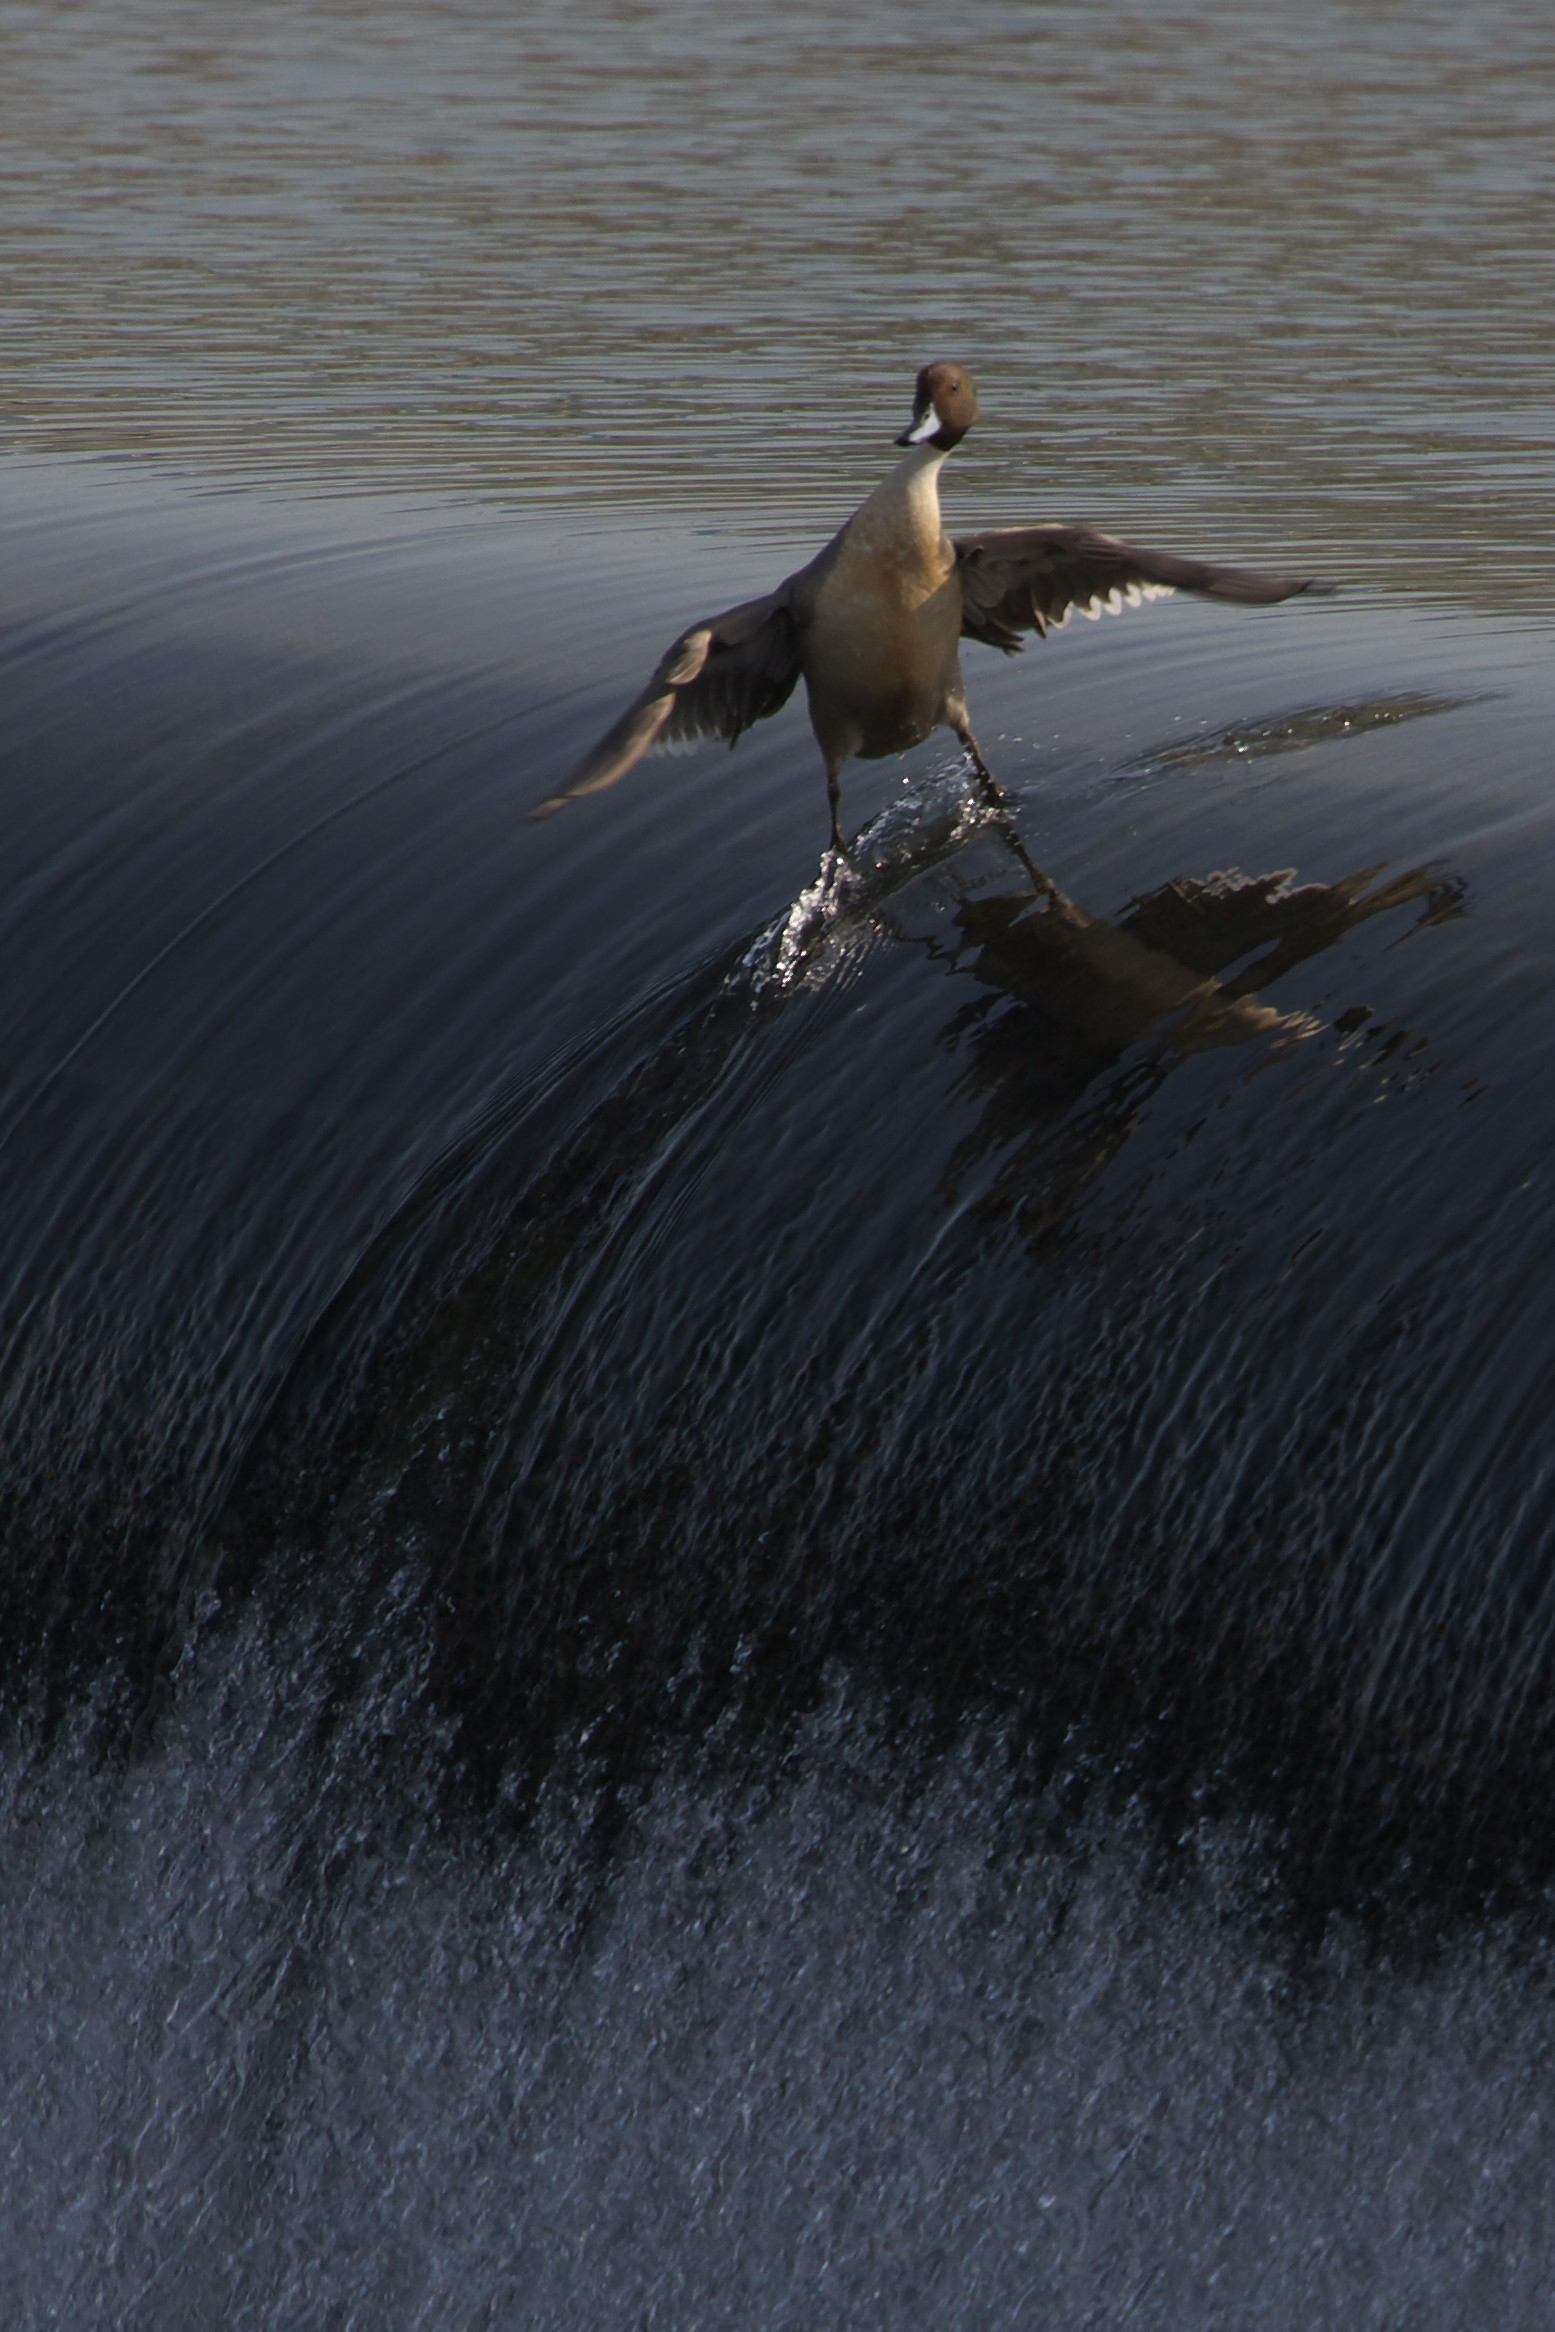 The world's most fascinating and extreme duck